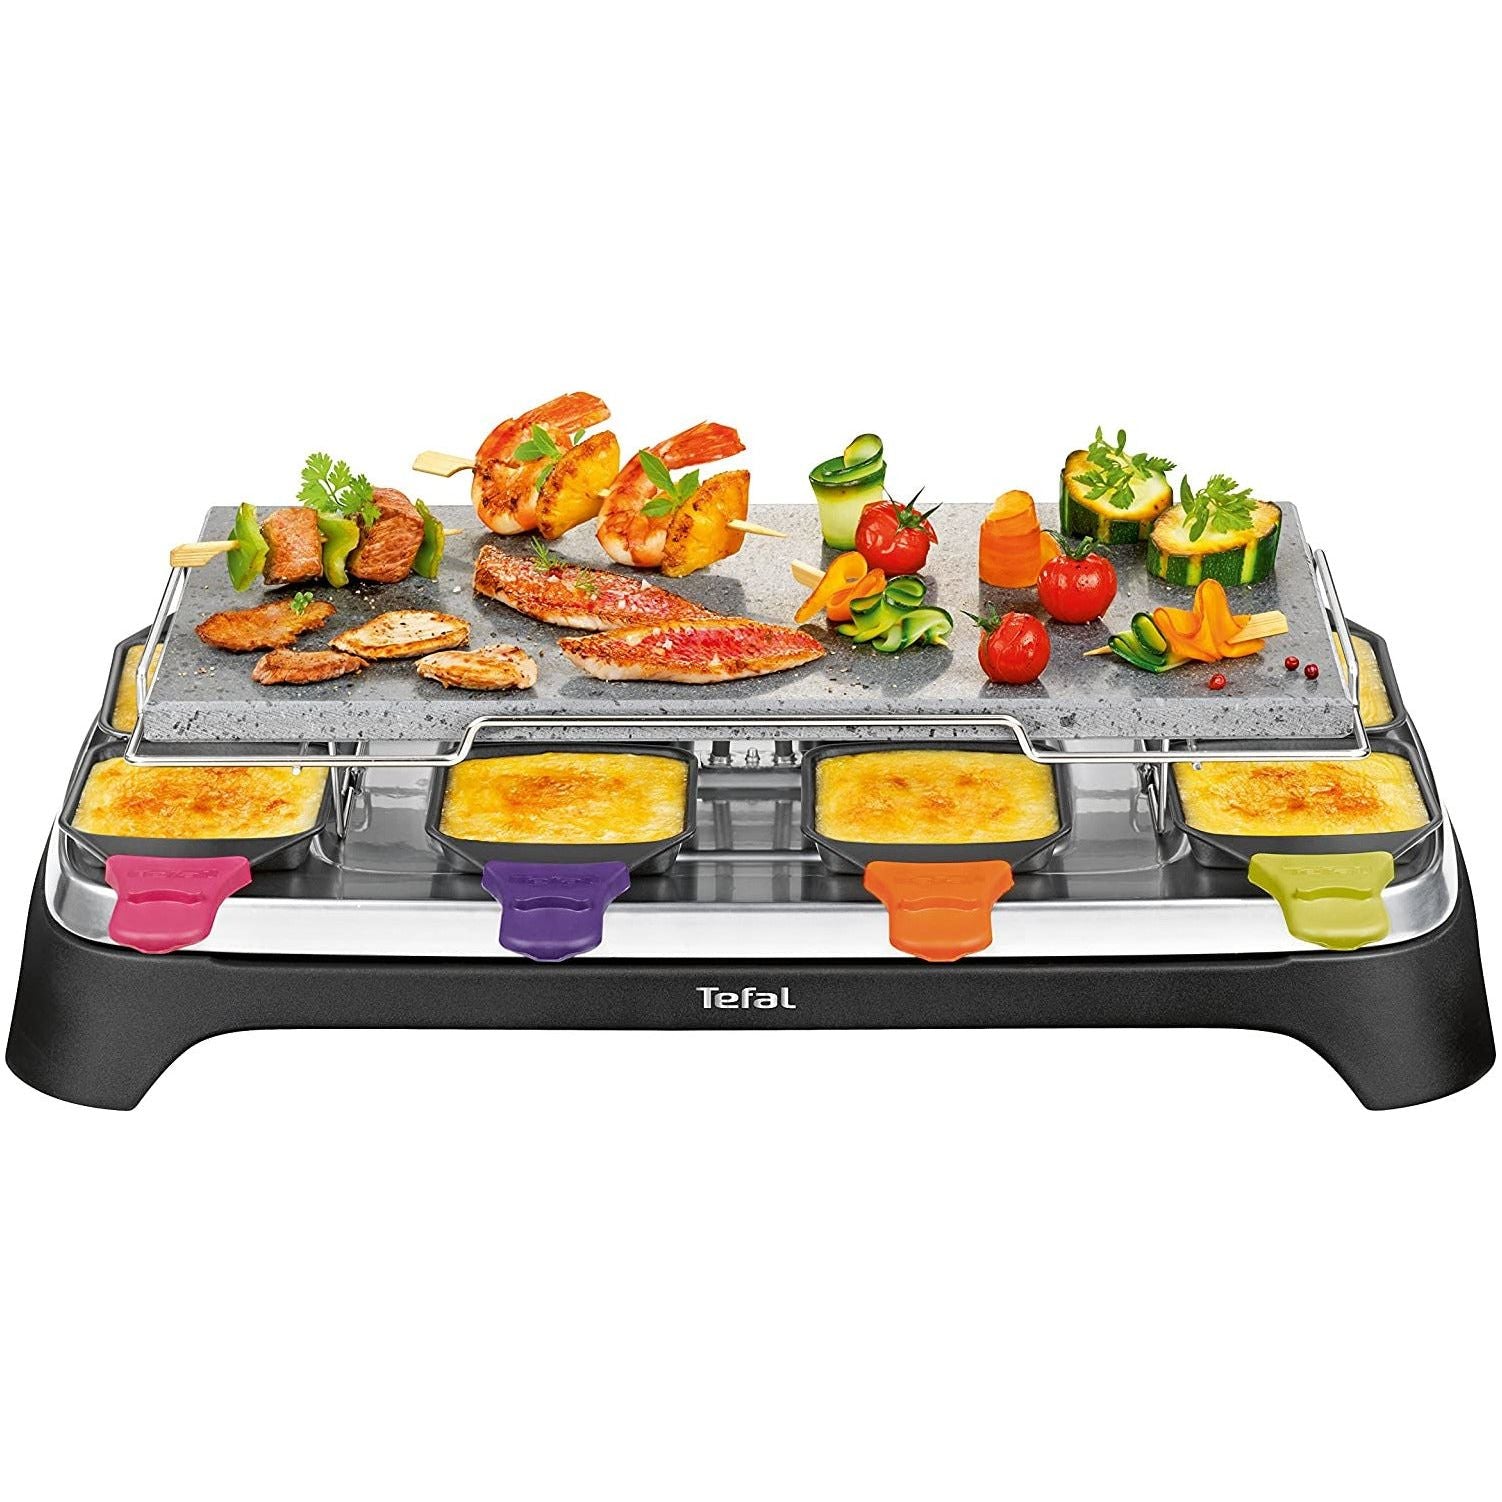 Grill Raclette Stone Multicolor for 8 Persons شواية و راكليت